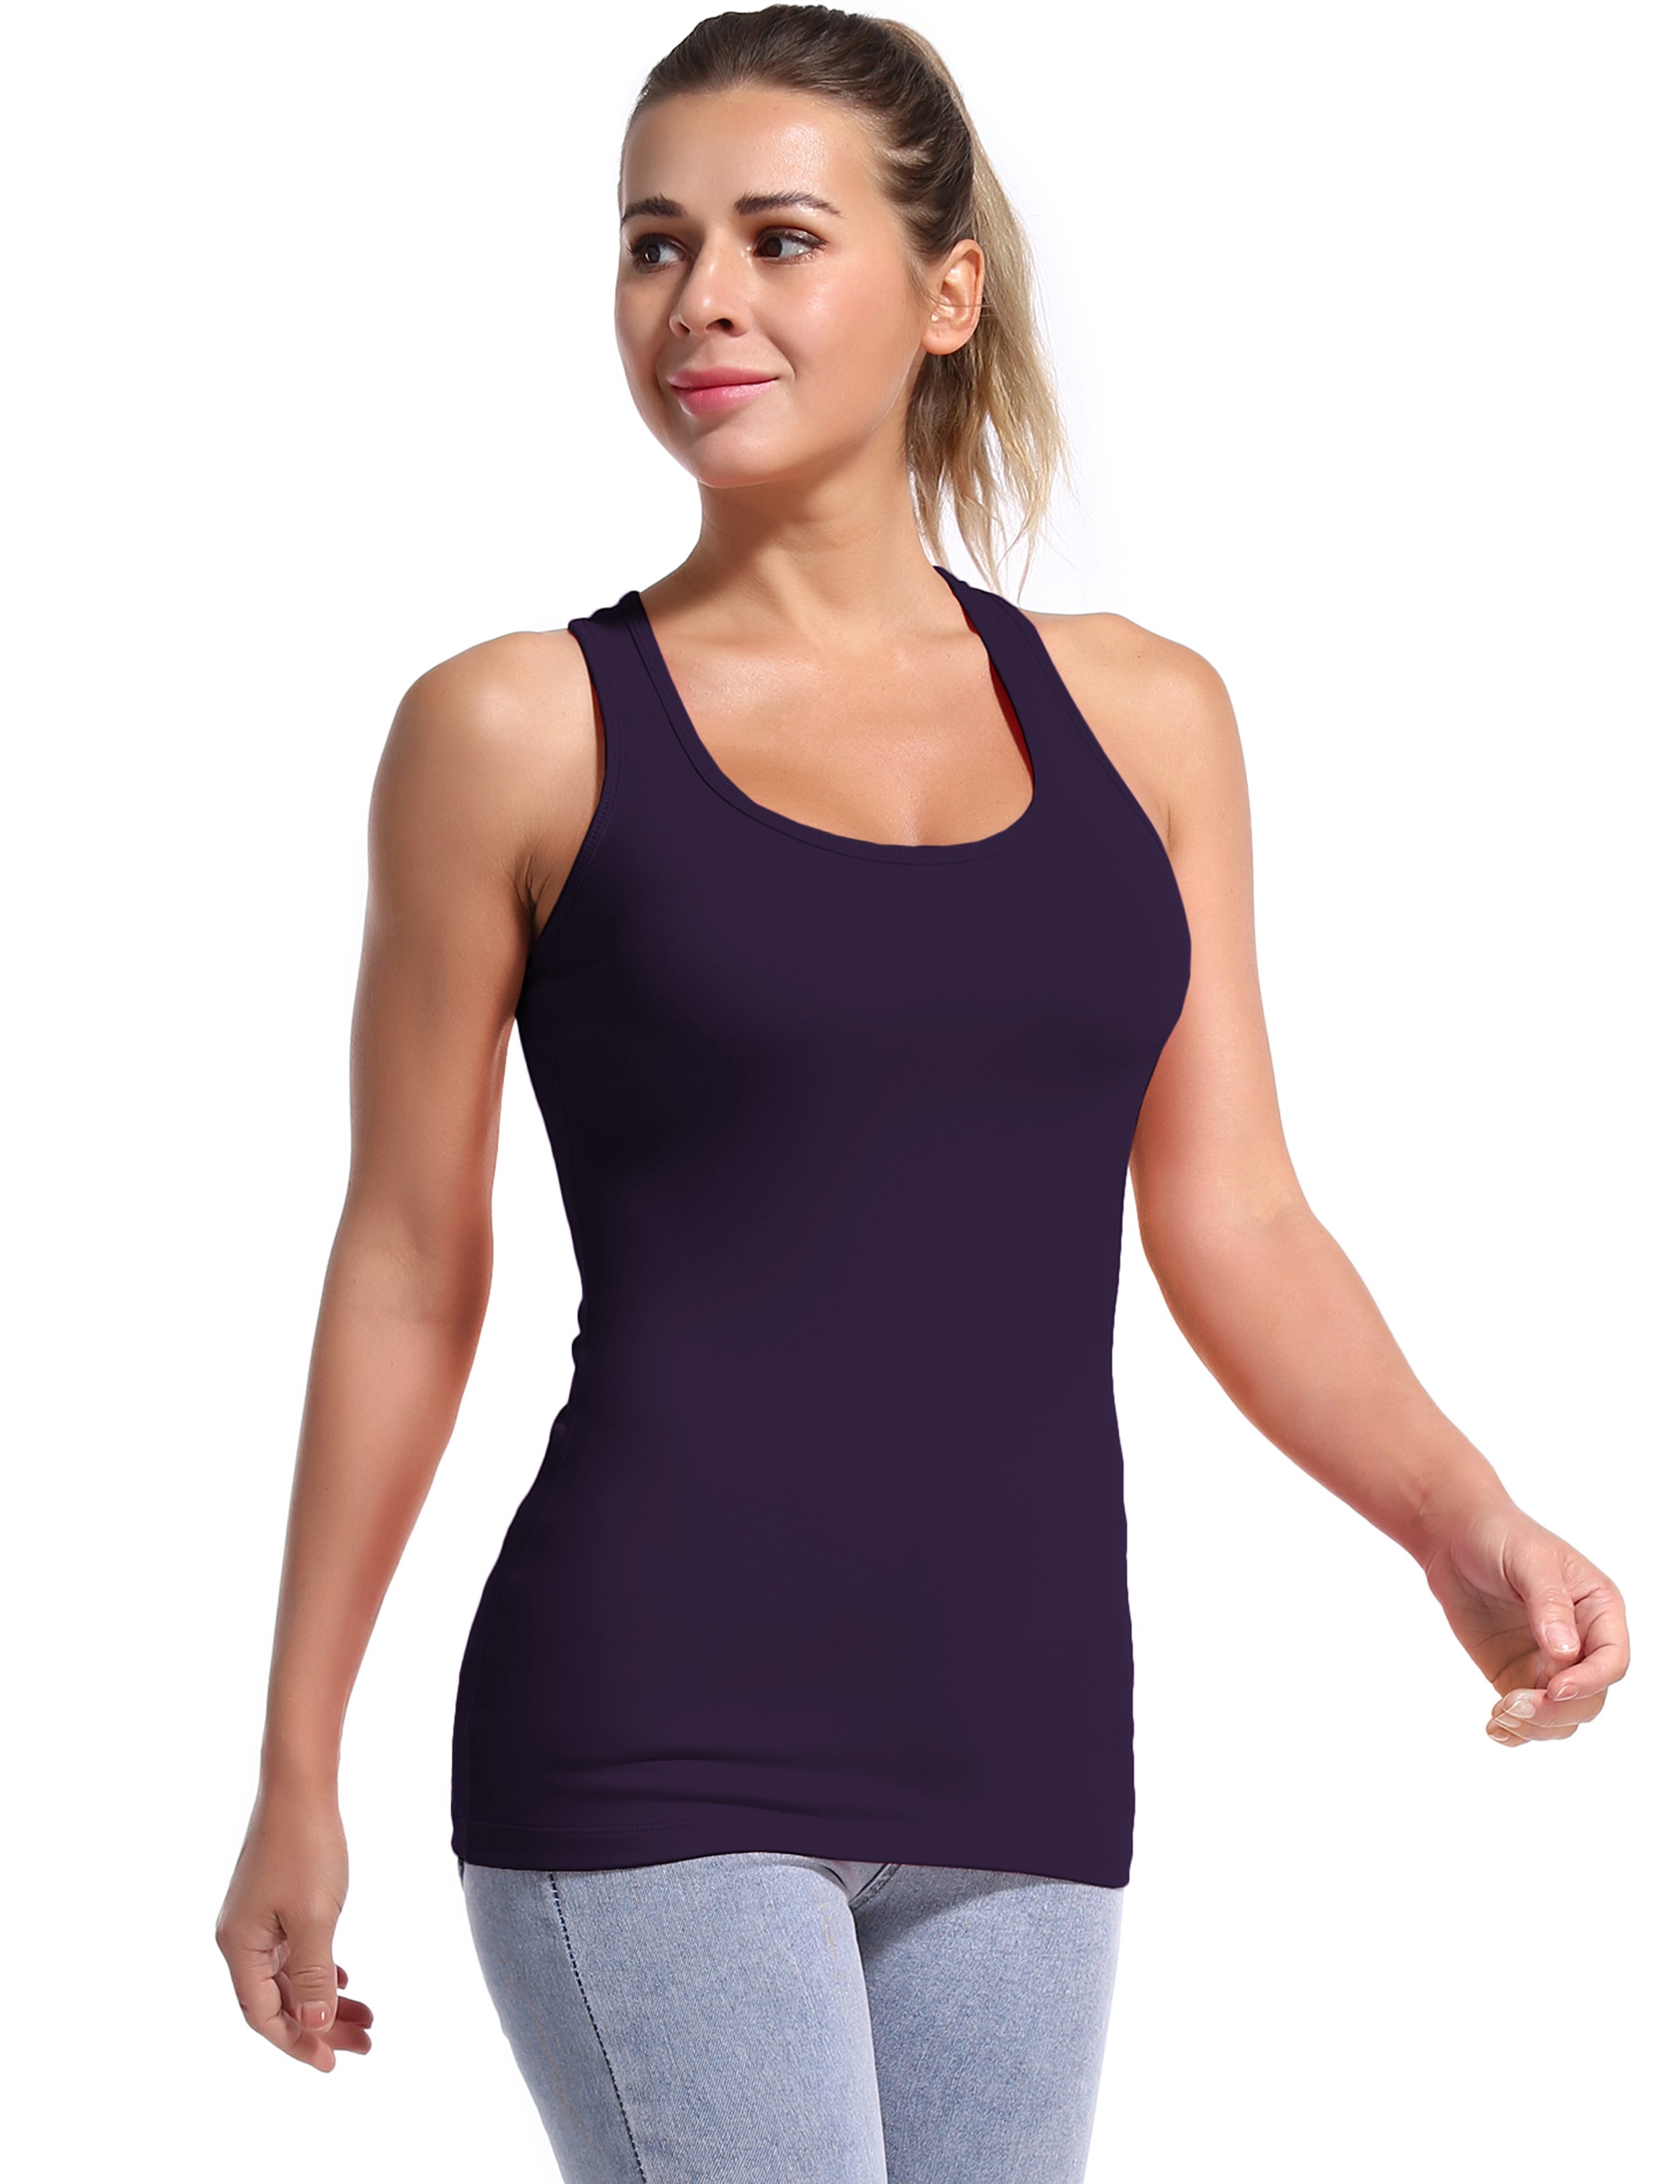 Racerback Athletic Tank Tops midnightblue 92%Nylon/8%Spandex(Cotton Soft) Designed for Golf Tight Fit So buttery soft, it feels weightless Sweat-wicking Four-way stretch Breathable Contours your body Sits below the waistband for moderate, everyday coverage